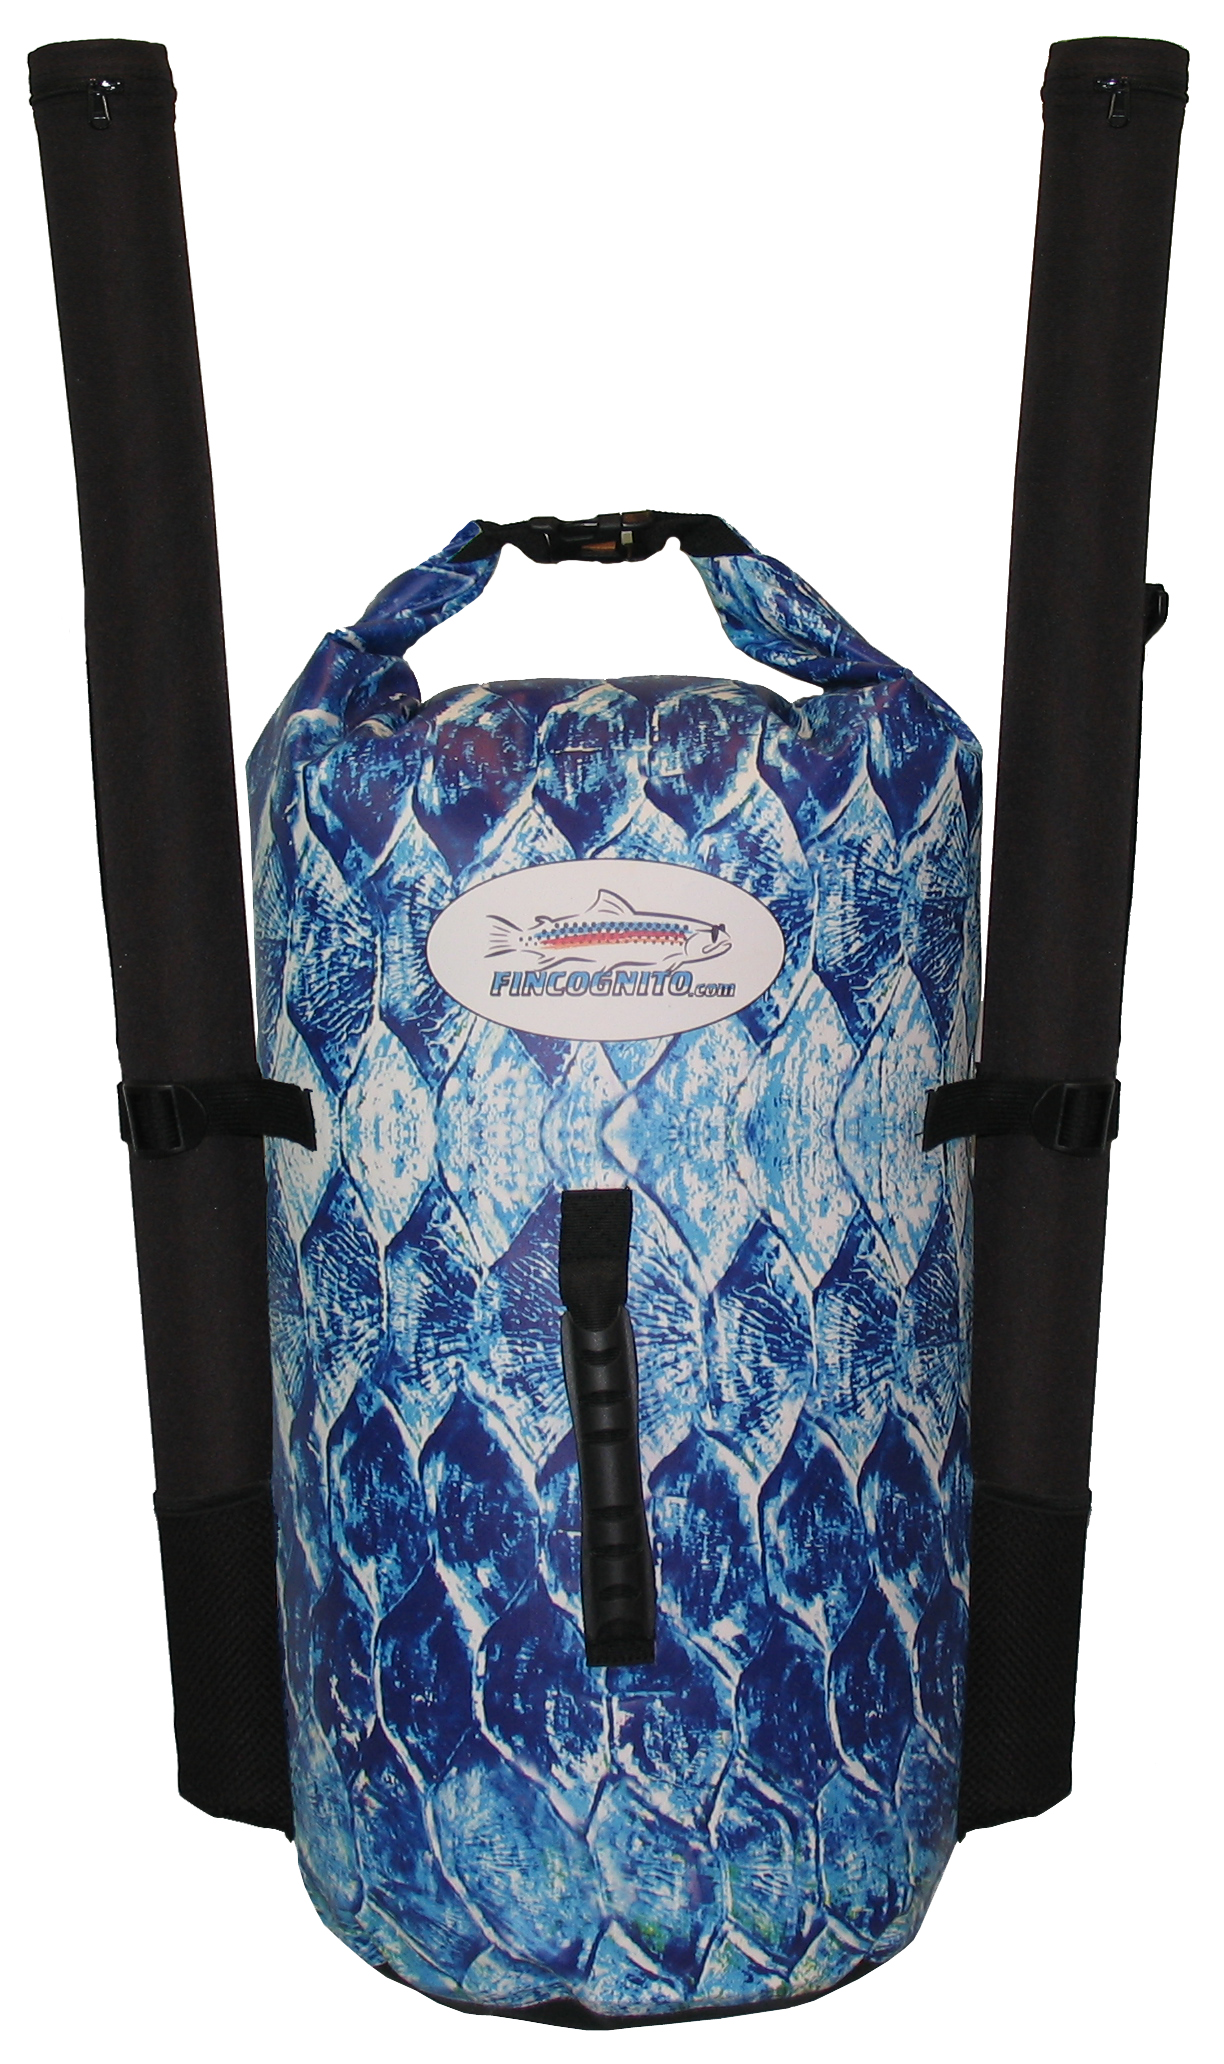 Tarpon Dry Bag Backpack Waterproof dry bags are no longer lacking in color. We utilize tough 250 denier PVC tarpaulin material with sonic-welded seams and a roll-top closure